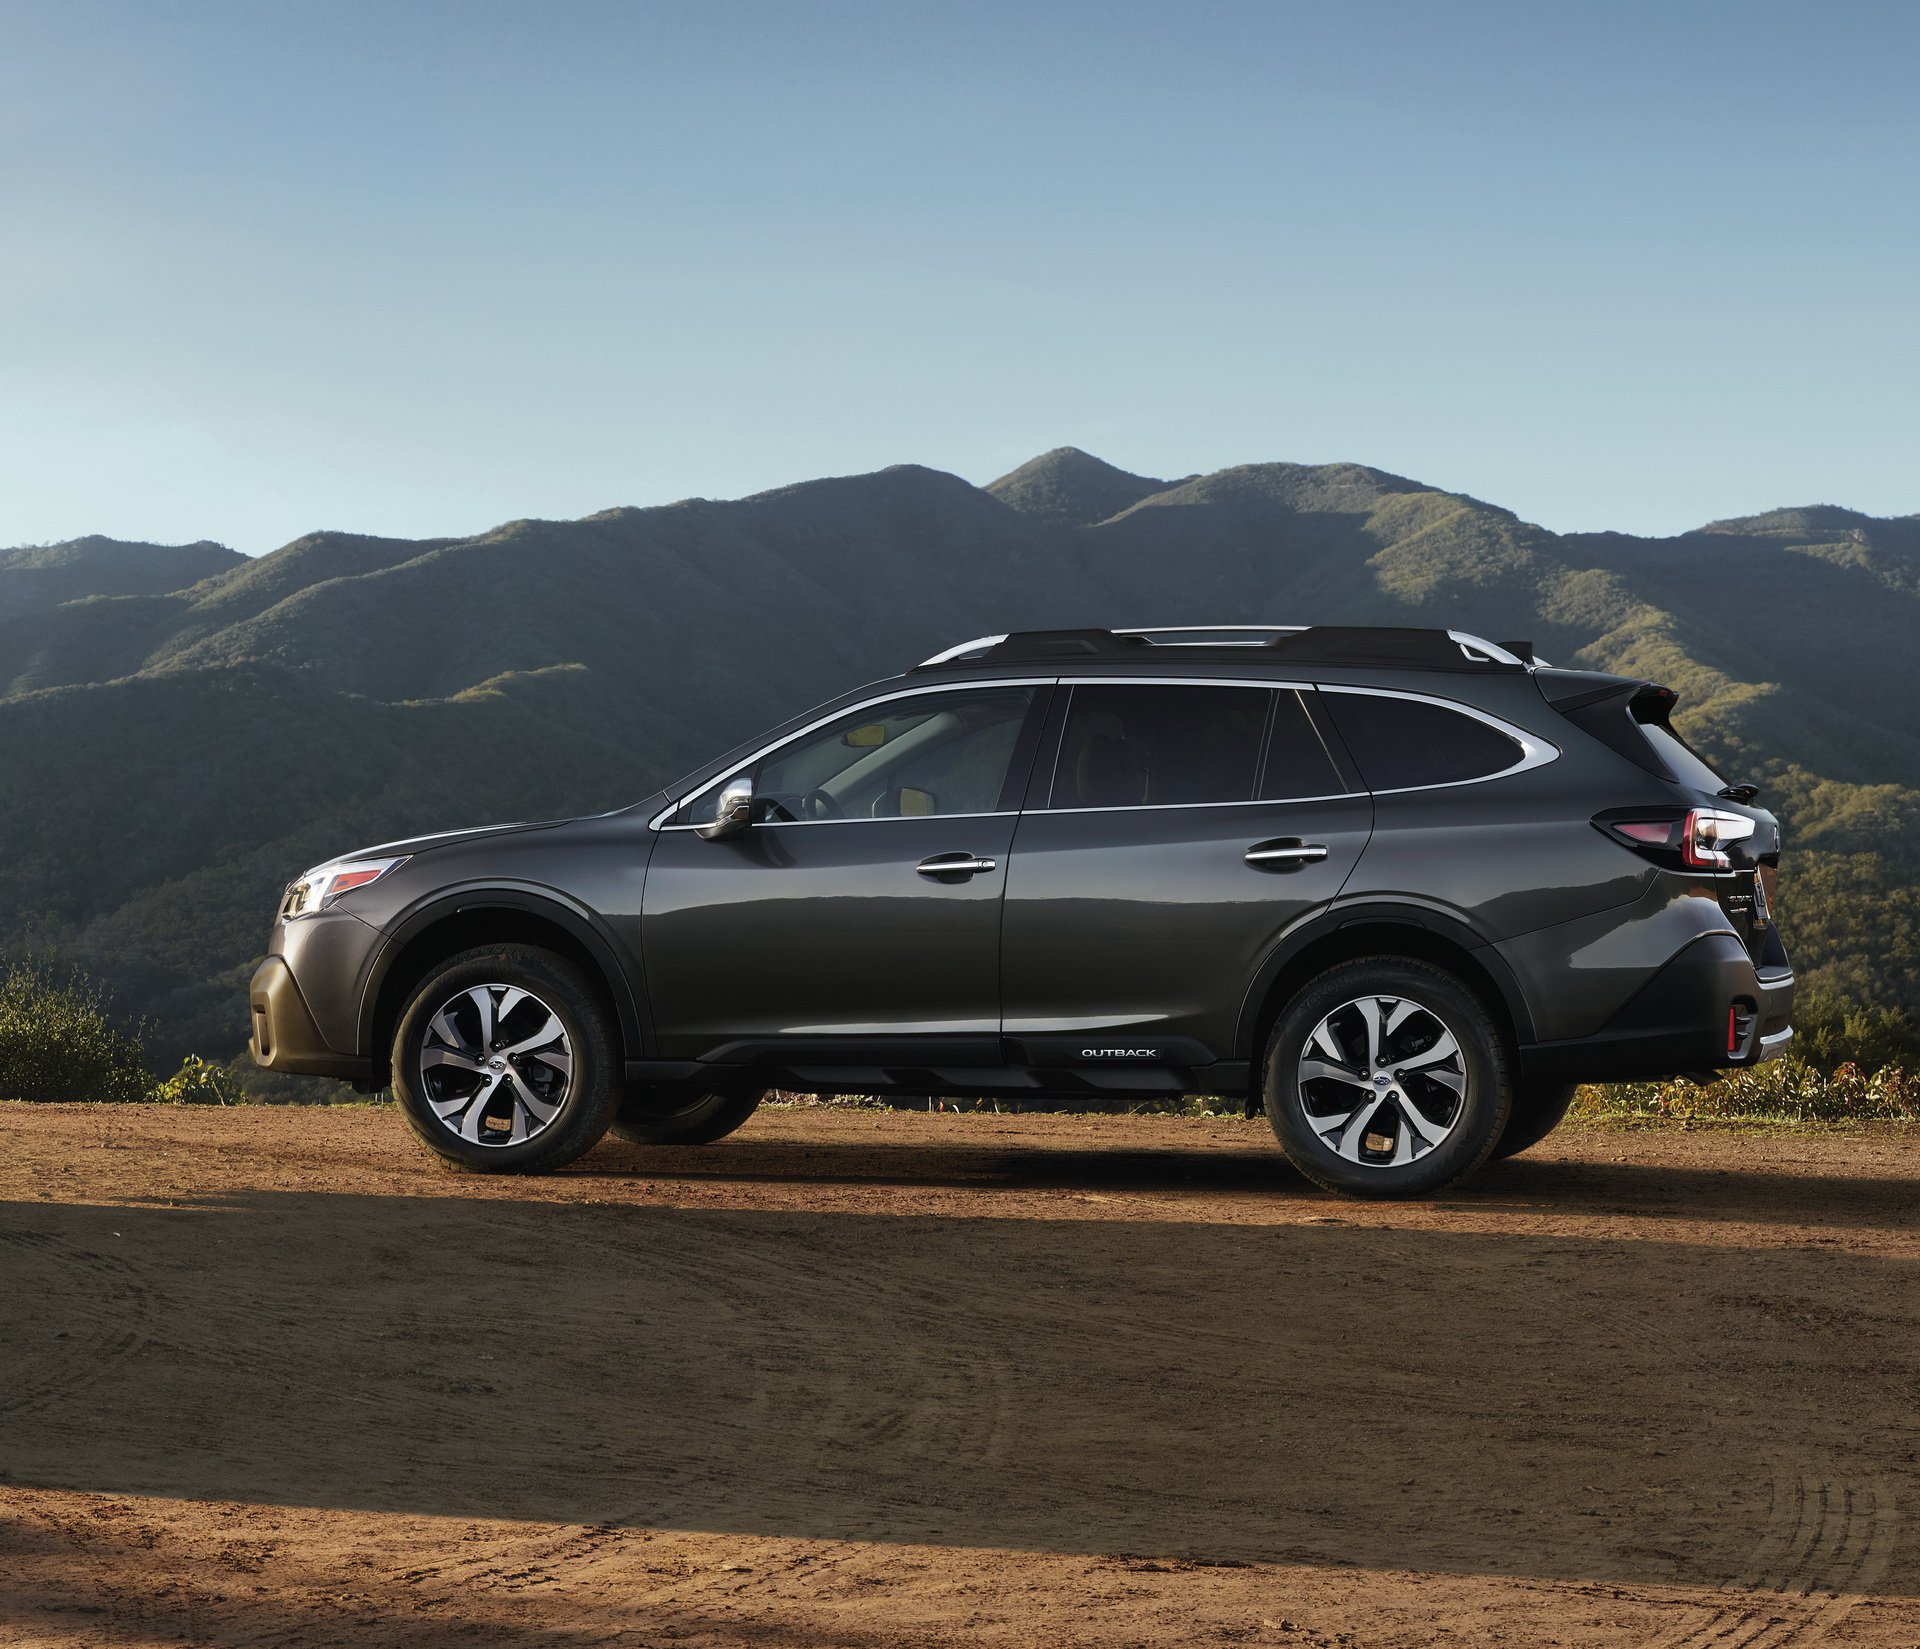 2020 Subaru Outback Revealed Somehow Looks More Rugged and Sporty 